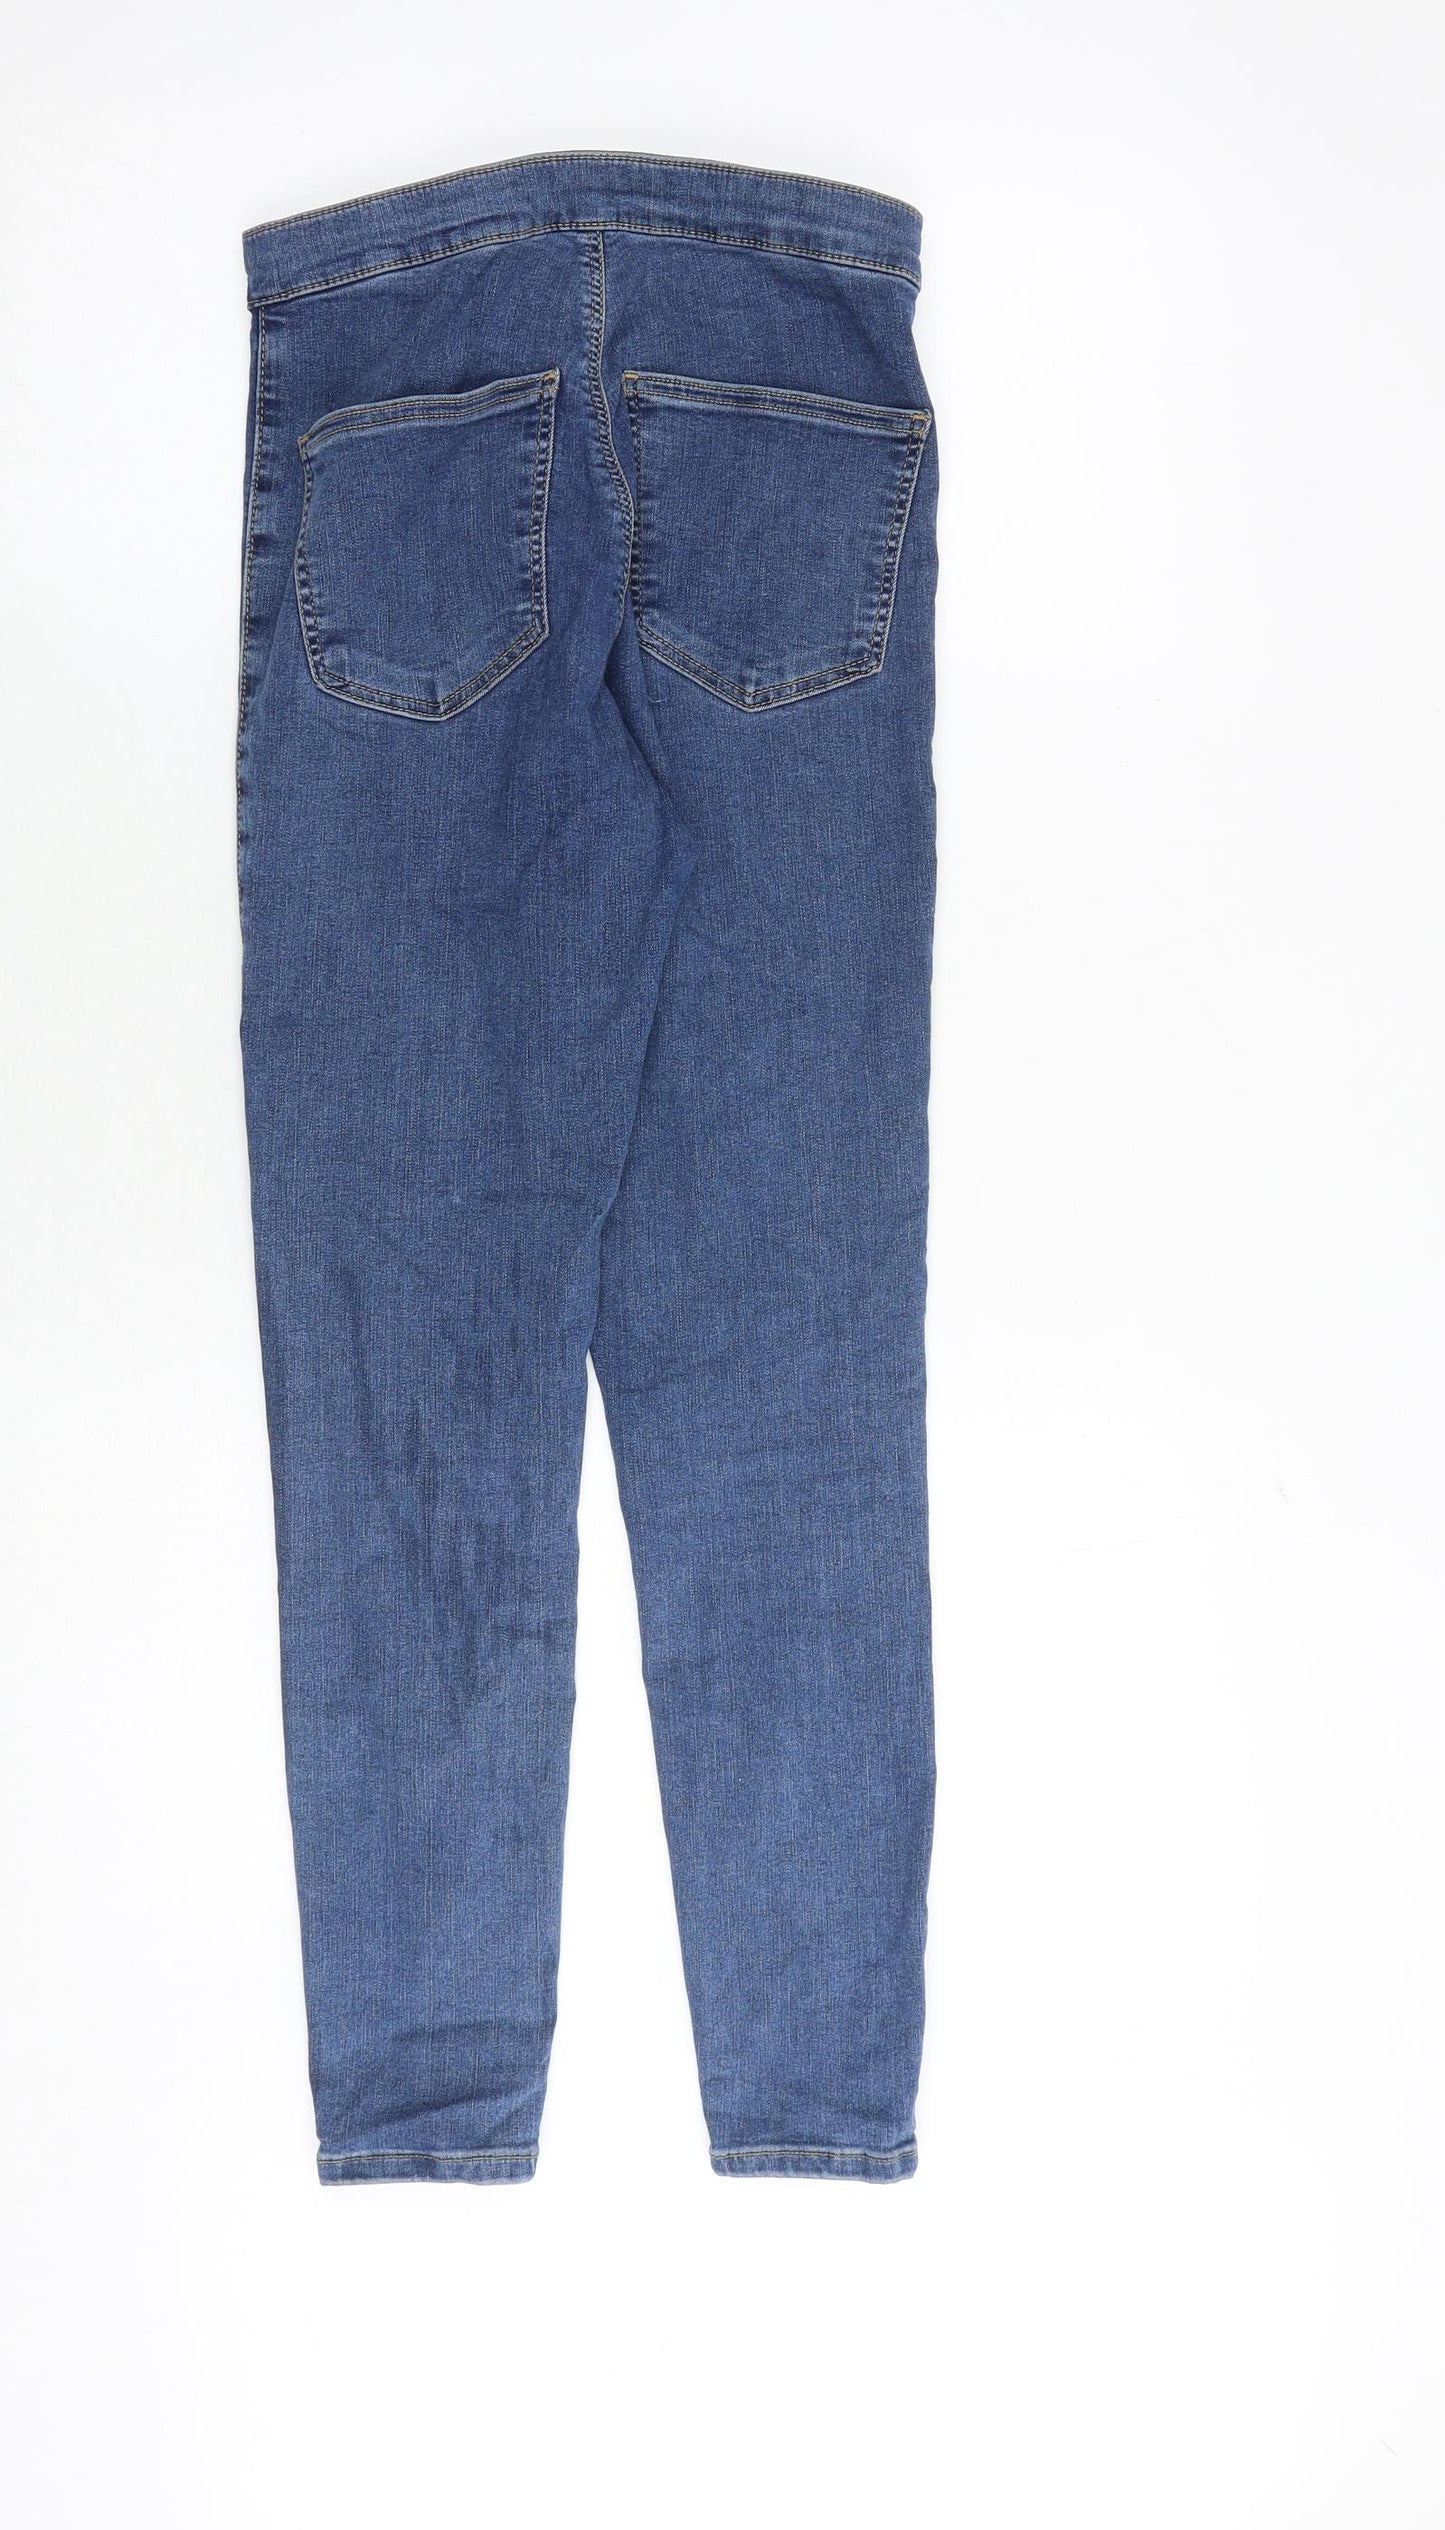 Topshop Womens Blue Cotton Skinny Jeans Size 28 in Regular Zip